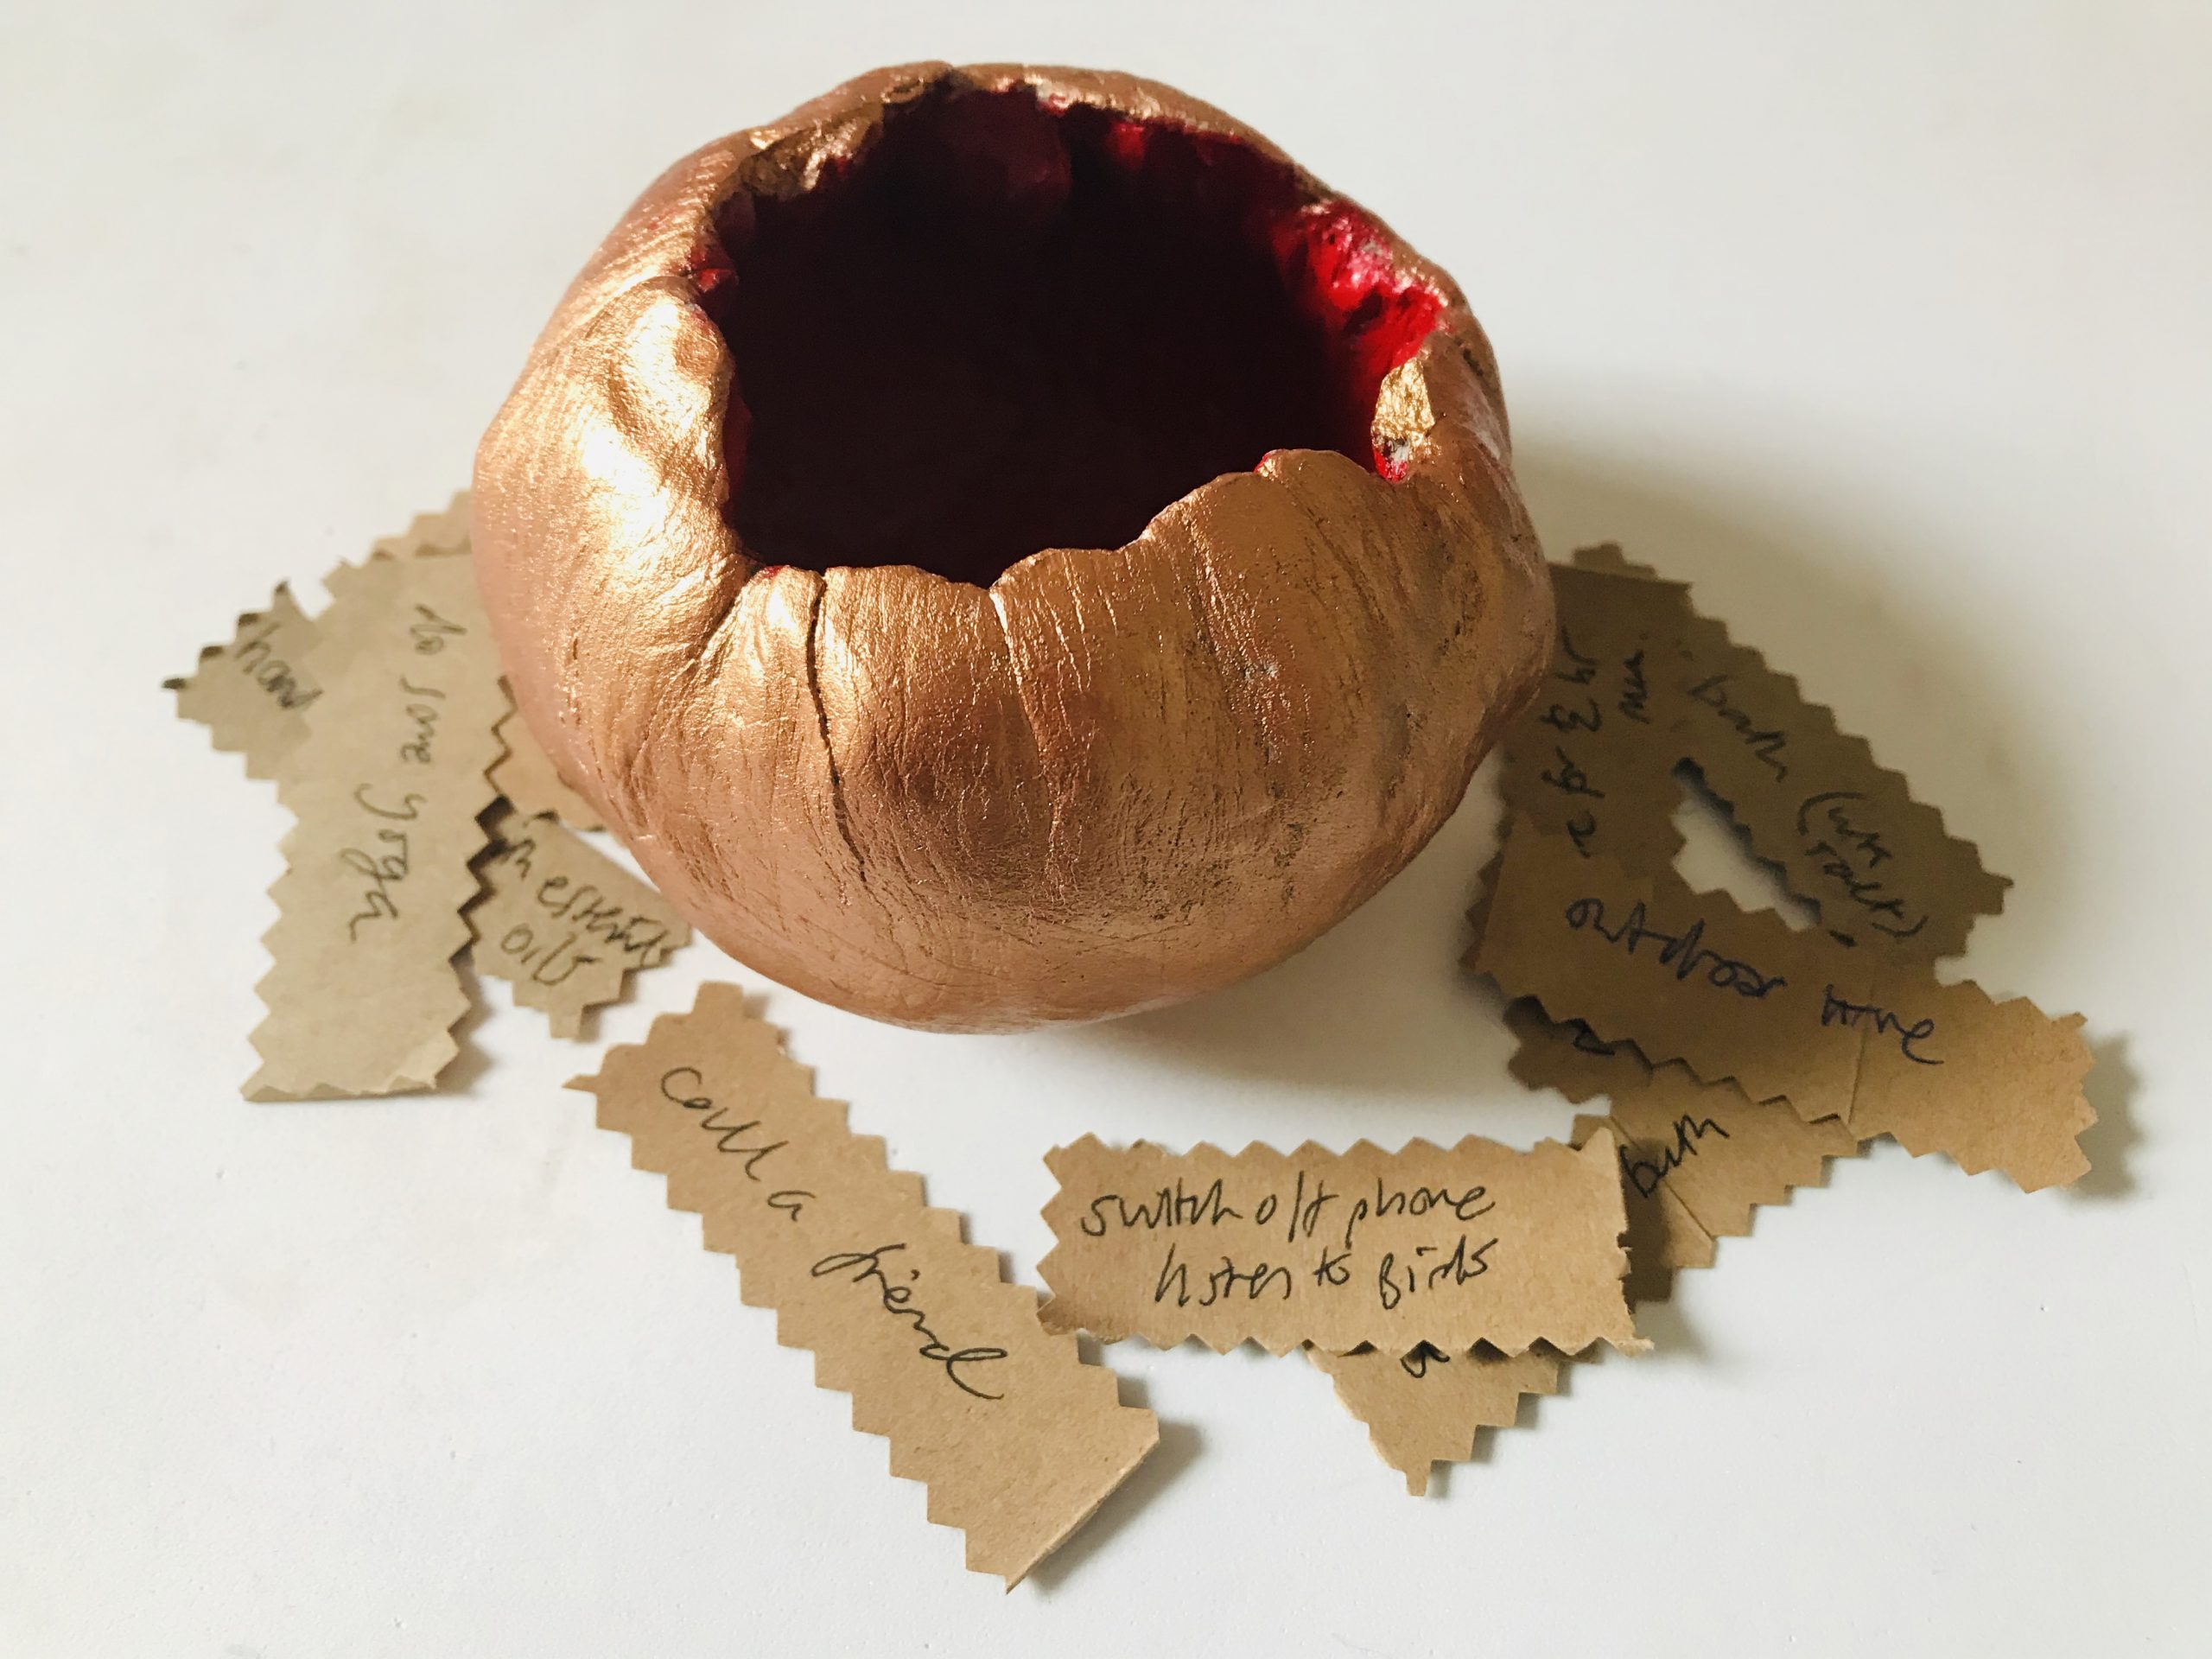 a bronze-coloured clay vessel surrounded by messages on small pieces of paper